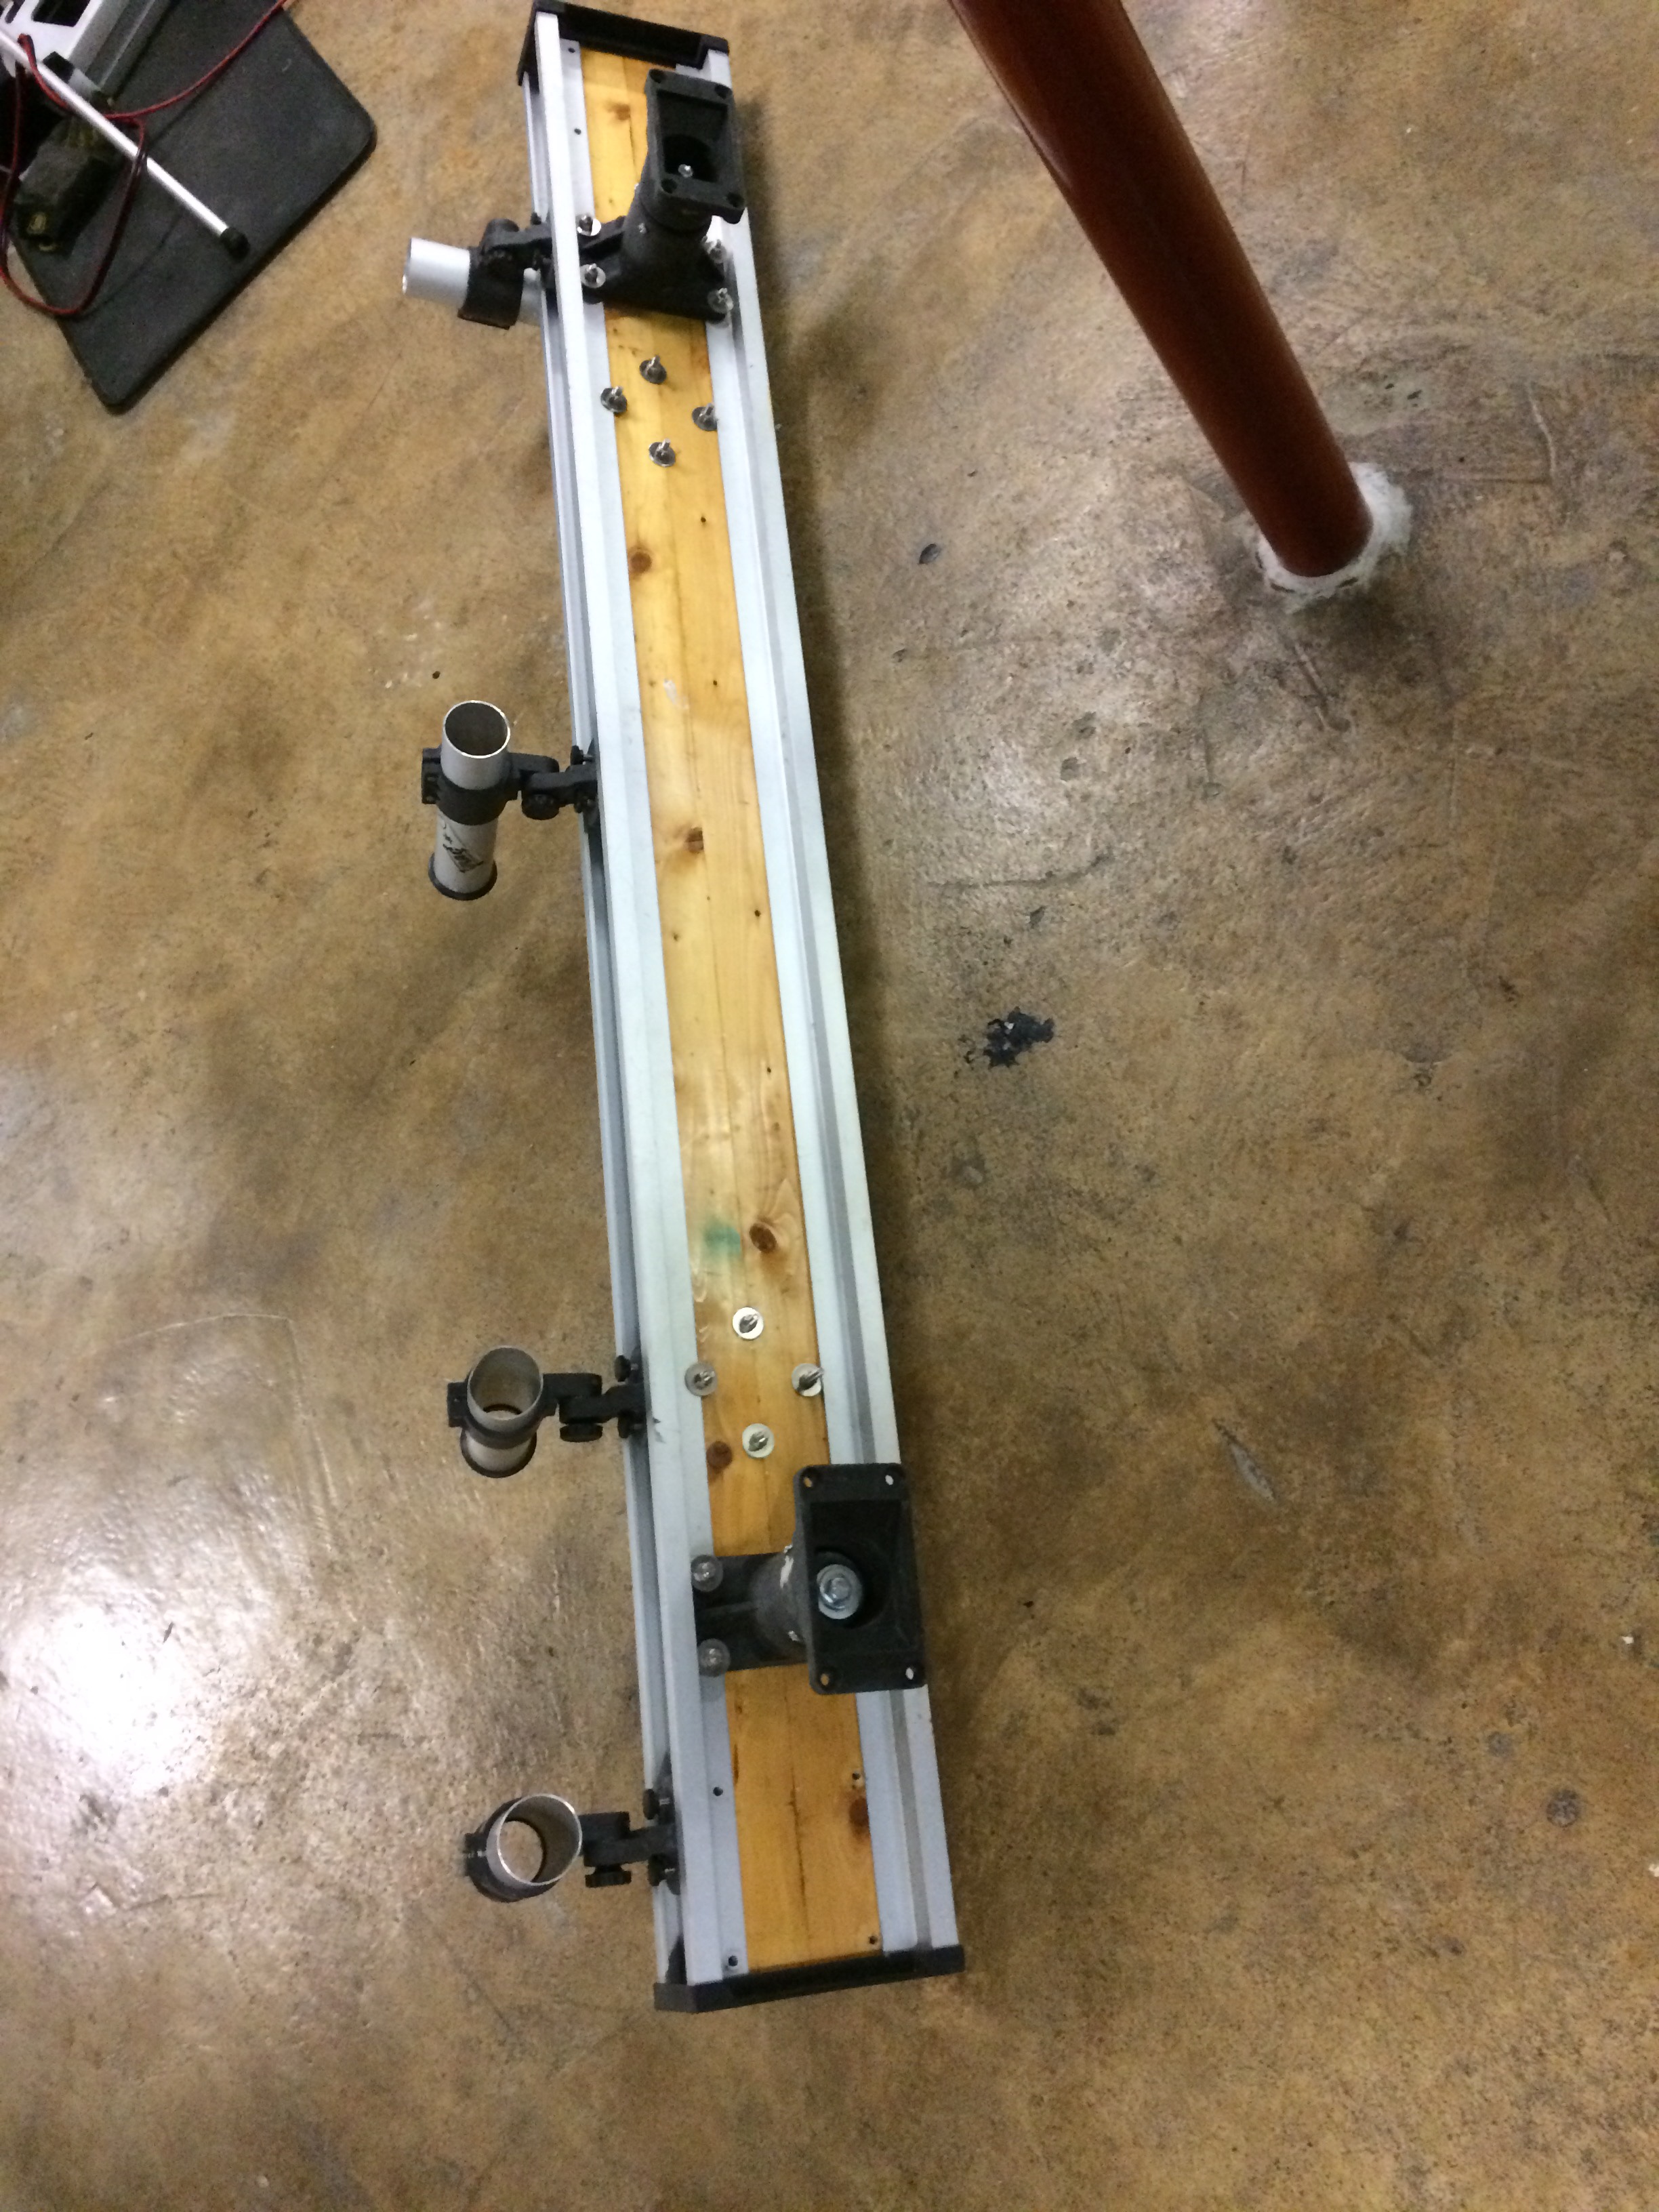 T&L Products Downrigger mounting board - Classifieds - Buy, Sell, Trade or  Rent - Lake Erie United - Walleye, Bass, Perch Fishing Forum